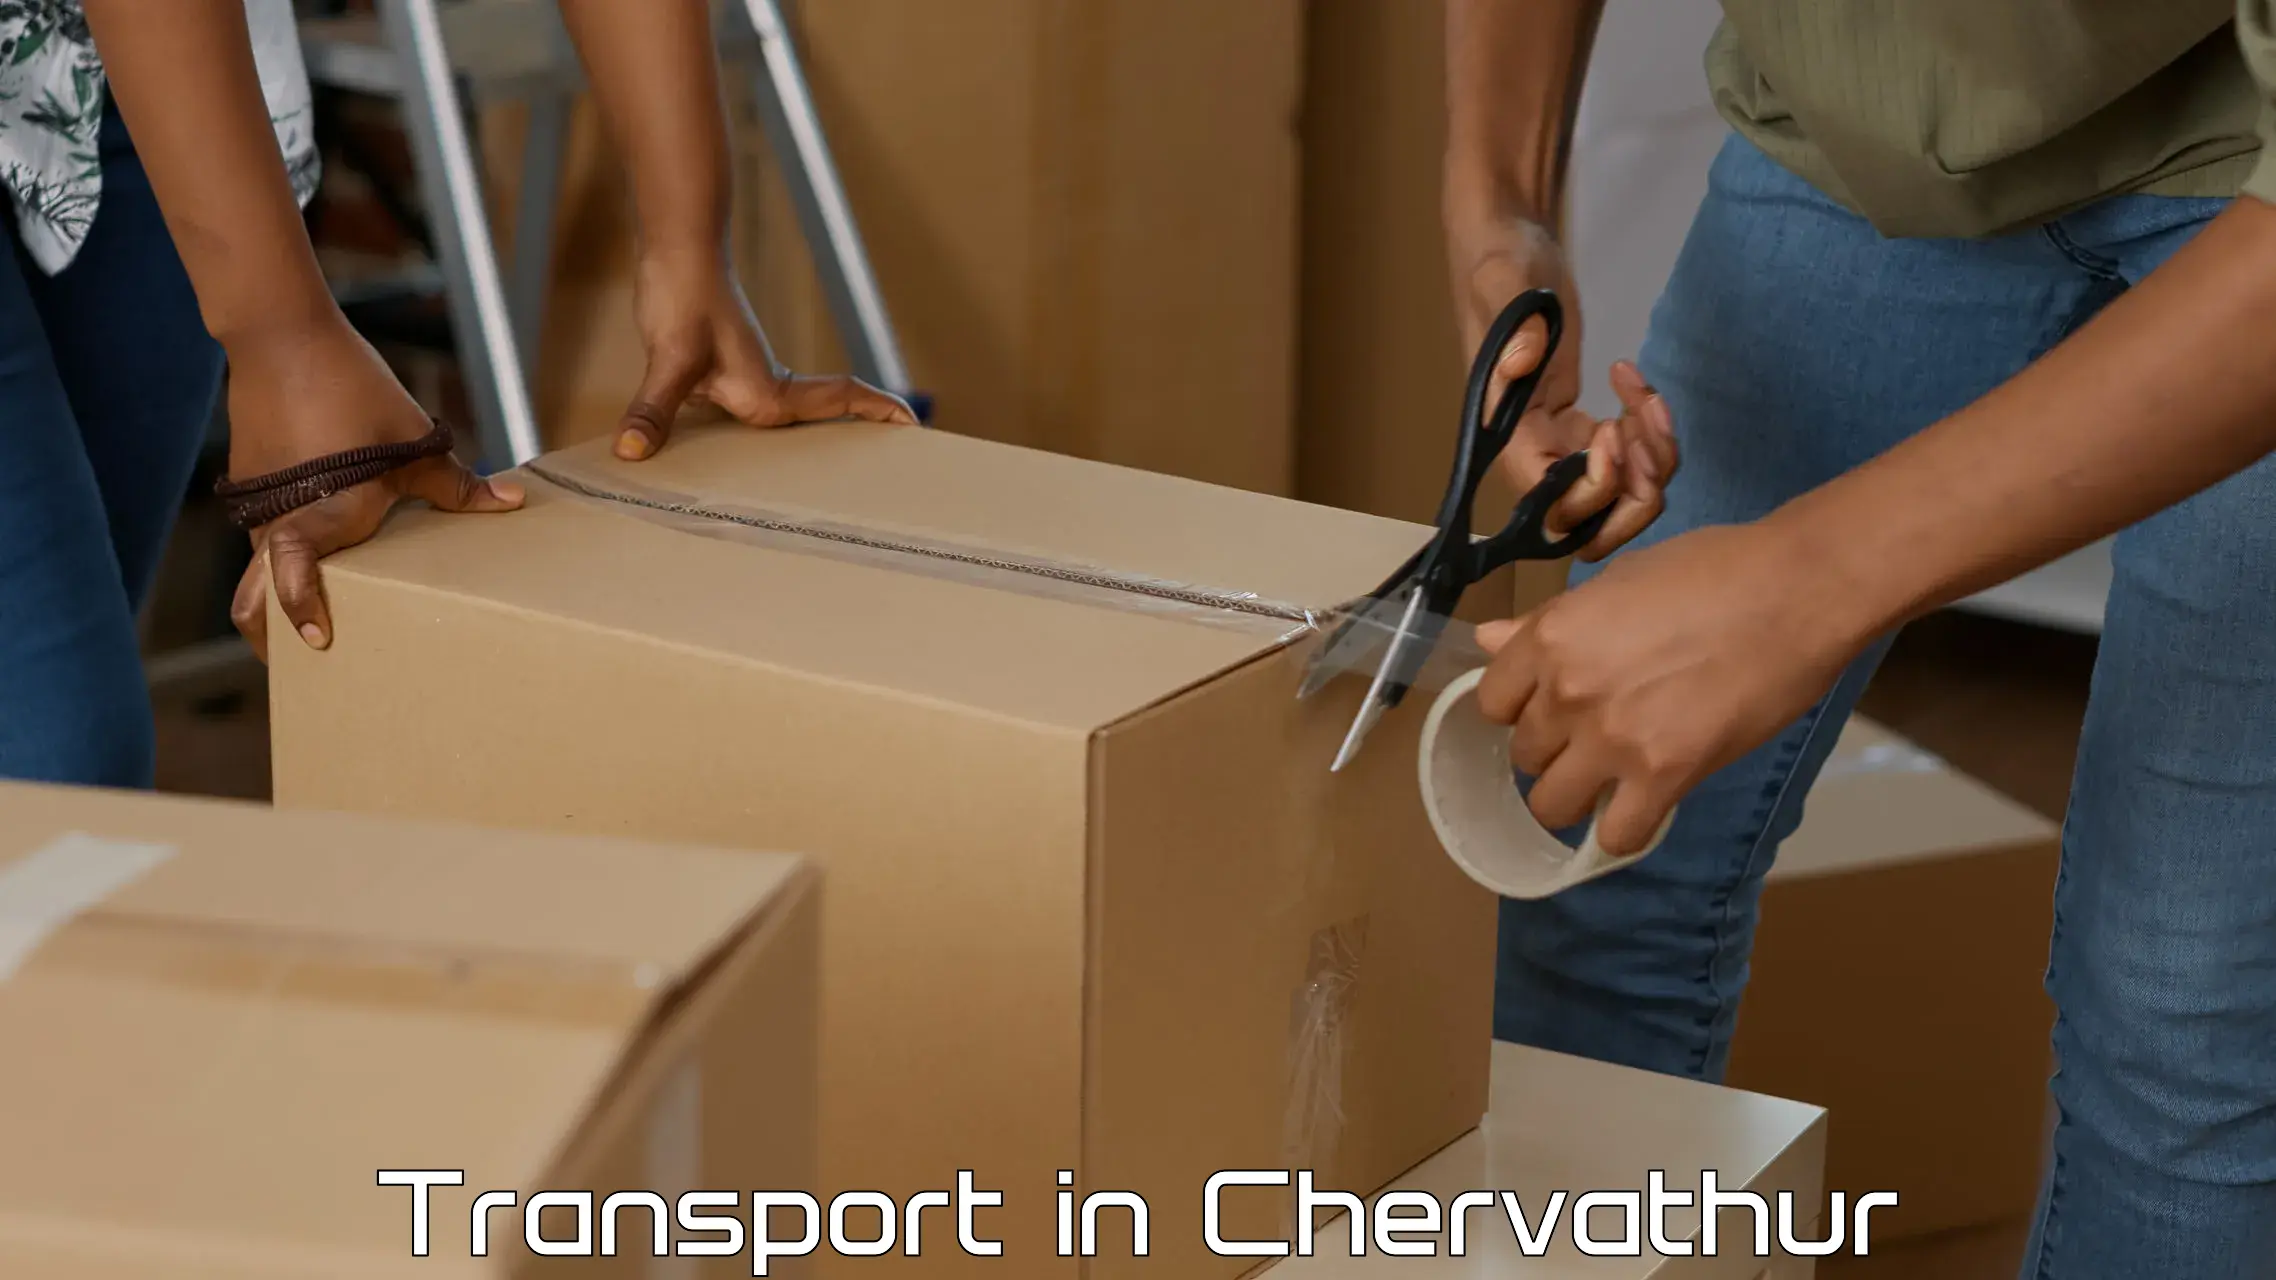 Goods delivery service in Chervathur